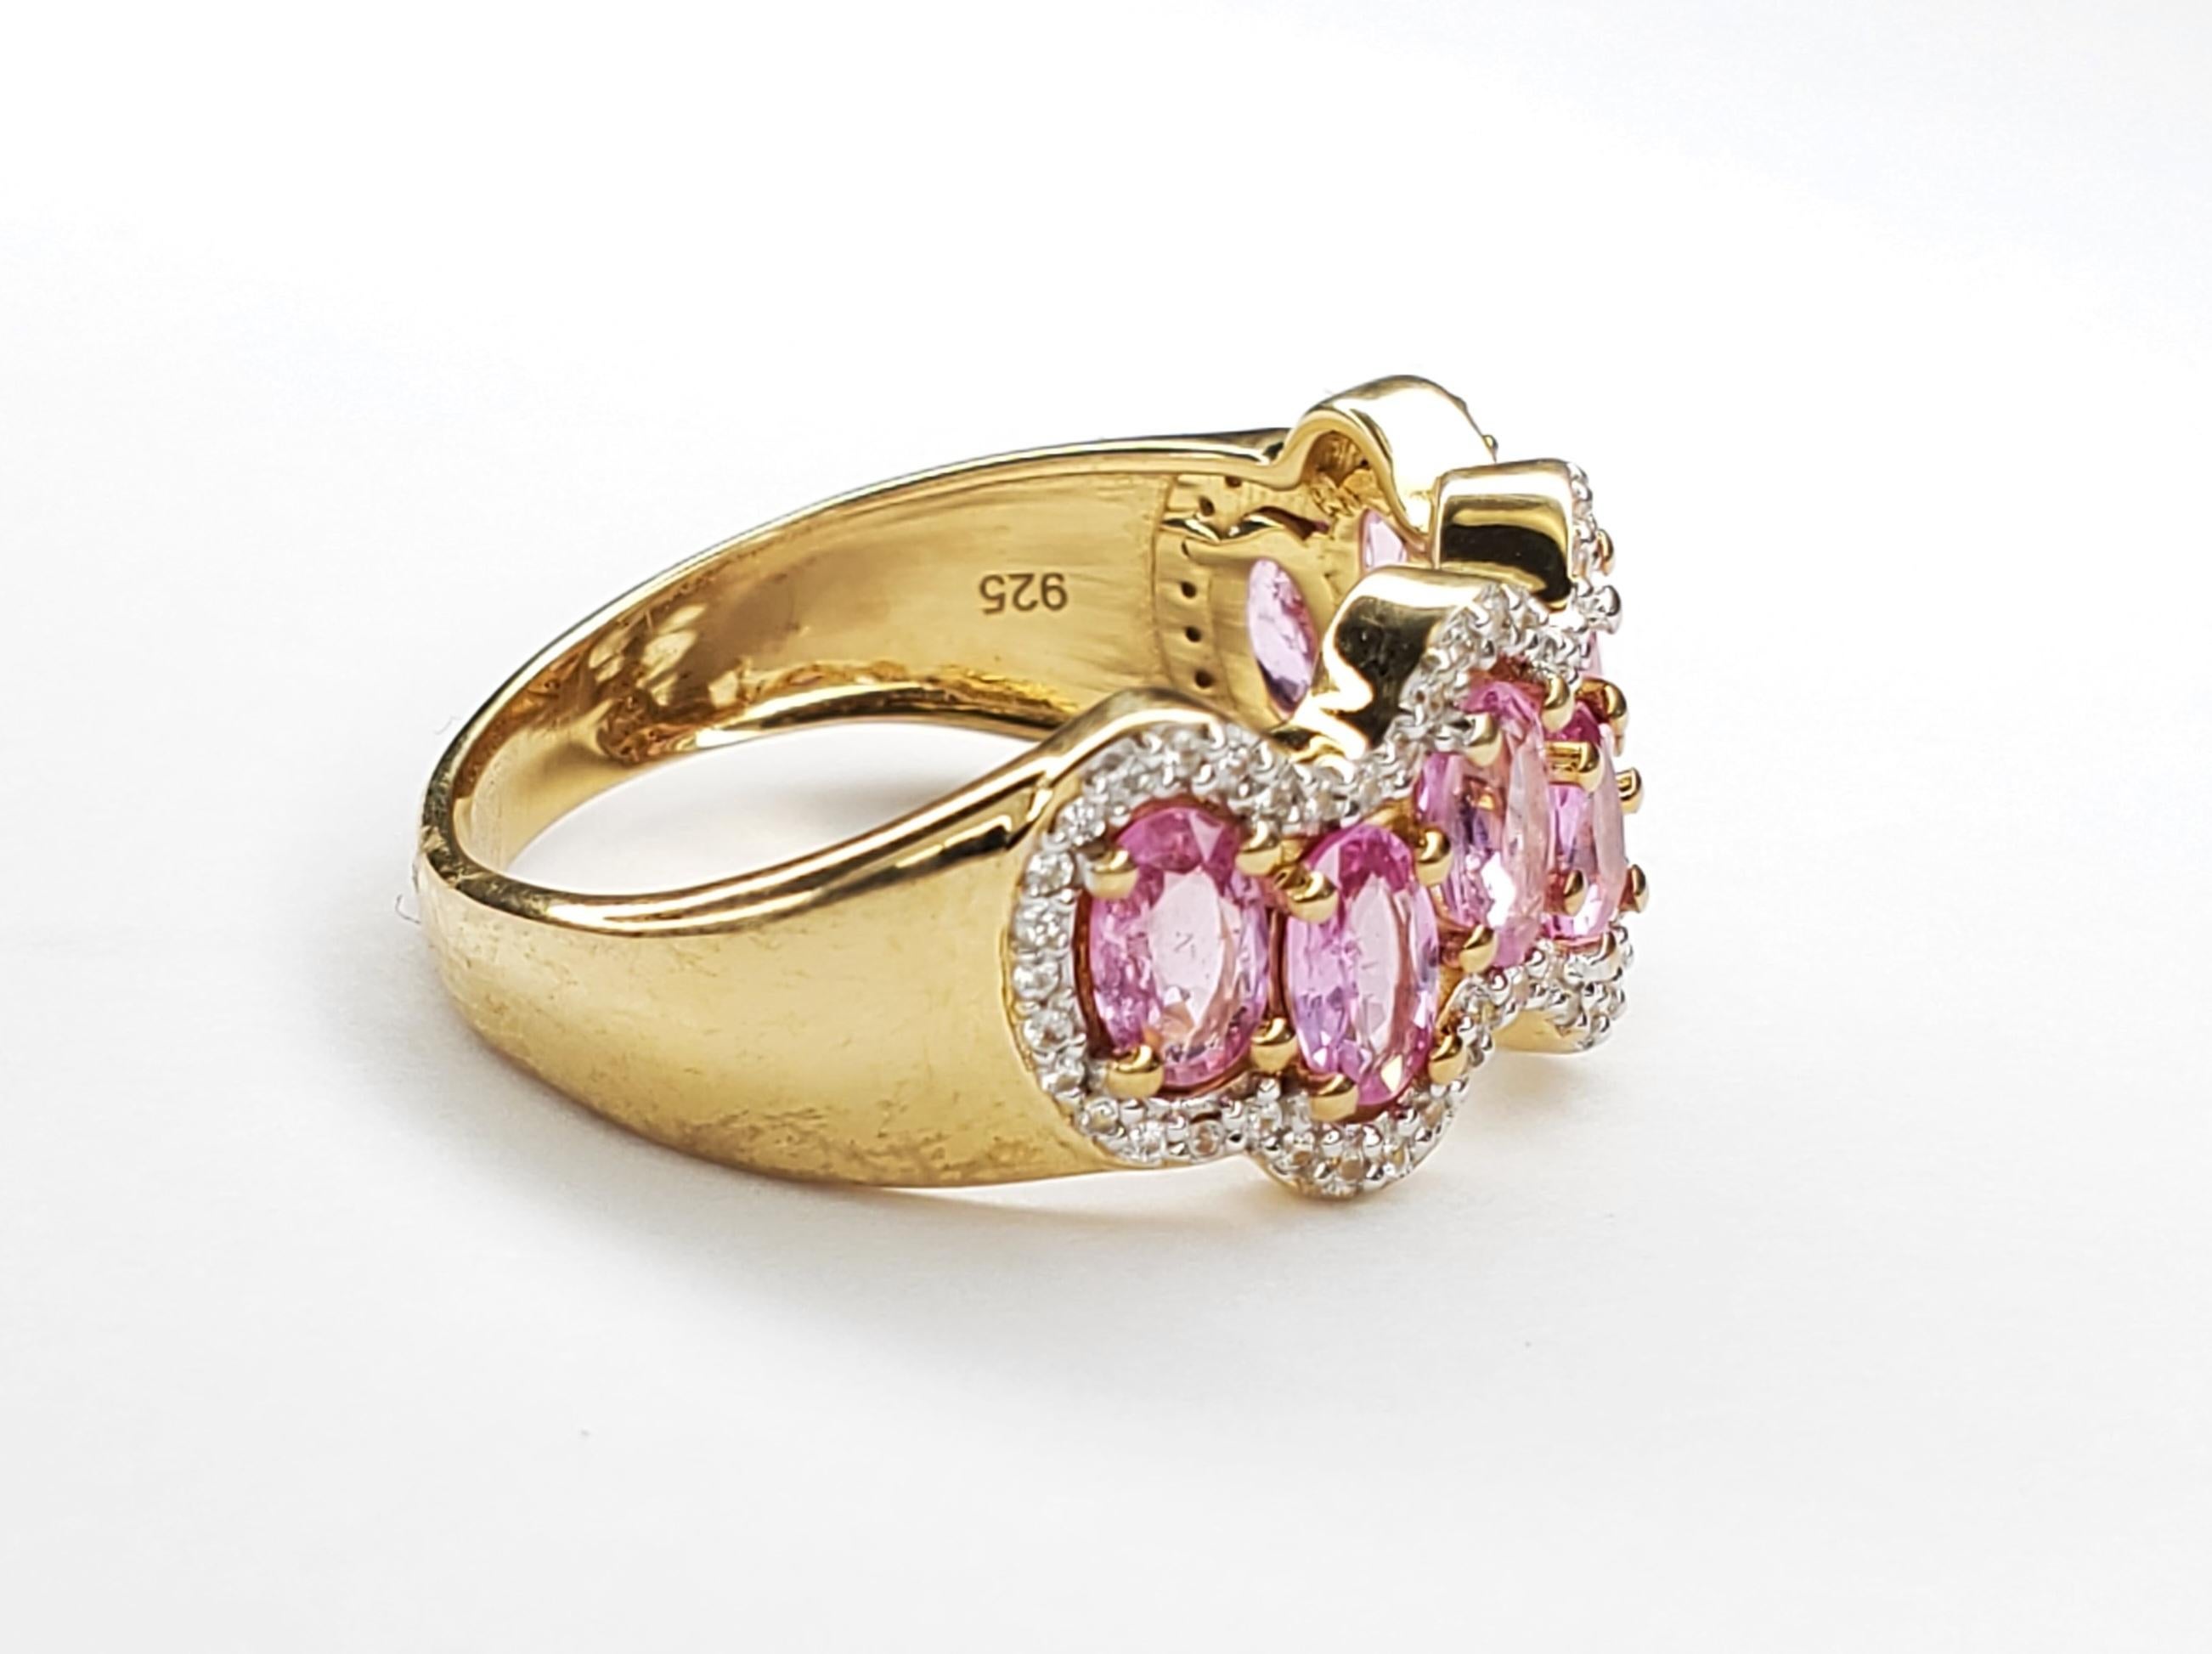 2.14cttw Pink Sapphire and White Zircon Sterling Silver Ring - Size 7

8   Pink Sapphire Oval - 1.76cttw
76 Natural White Zircon Round - 0.38cttw 

.925 Sterling Silver w/ Rhodium Finish 

US Ring Size : 7

MSRP: $702.00
